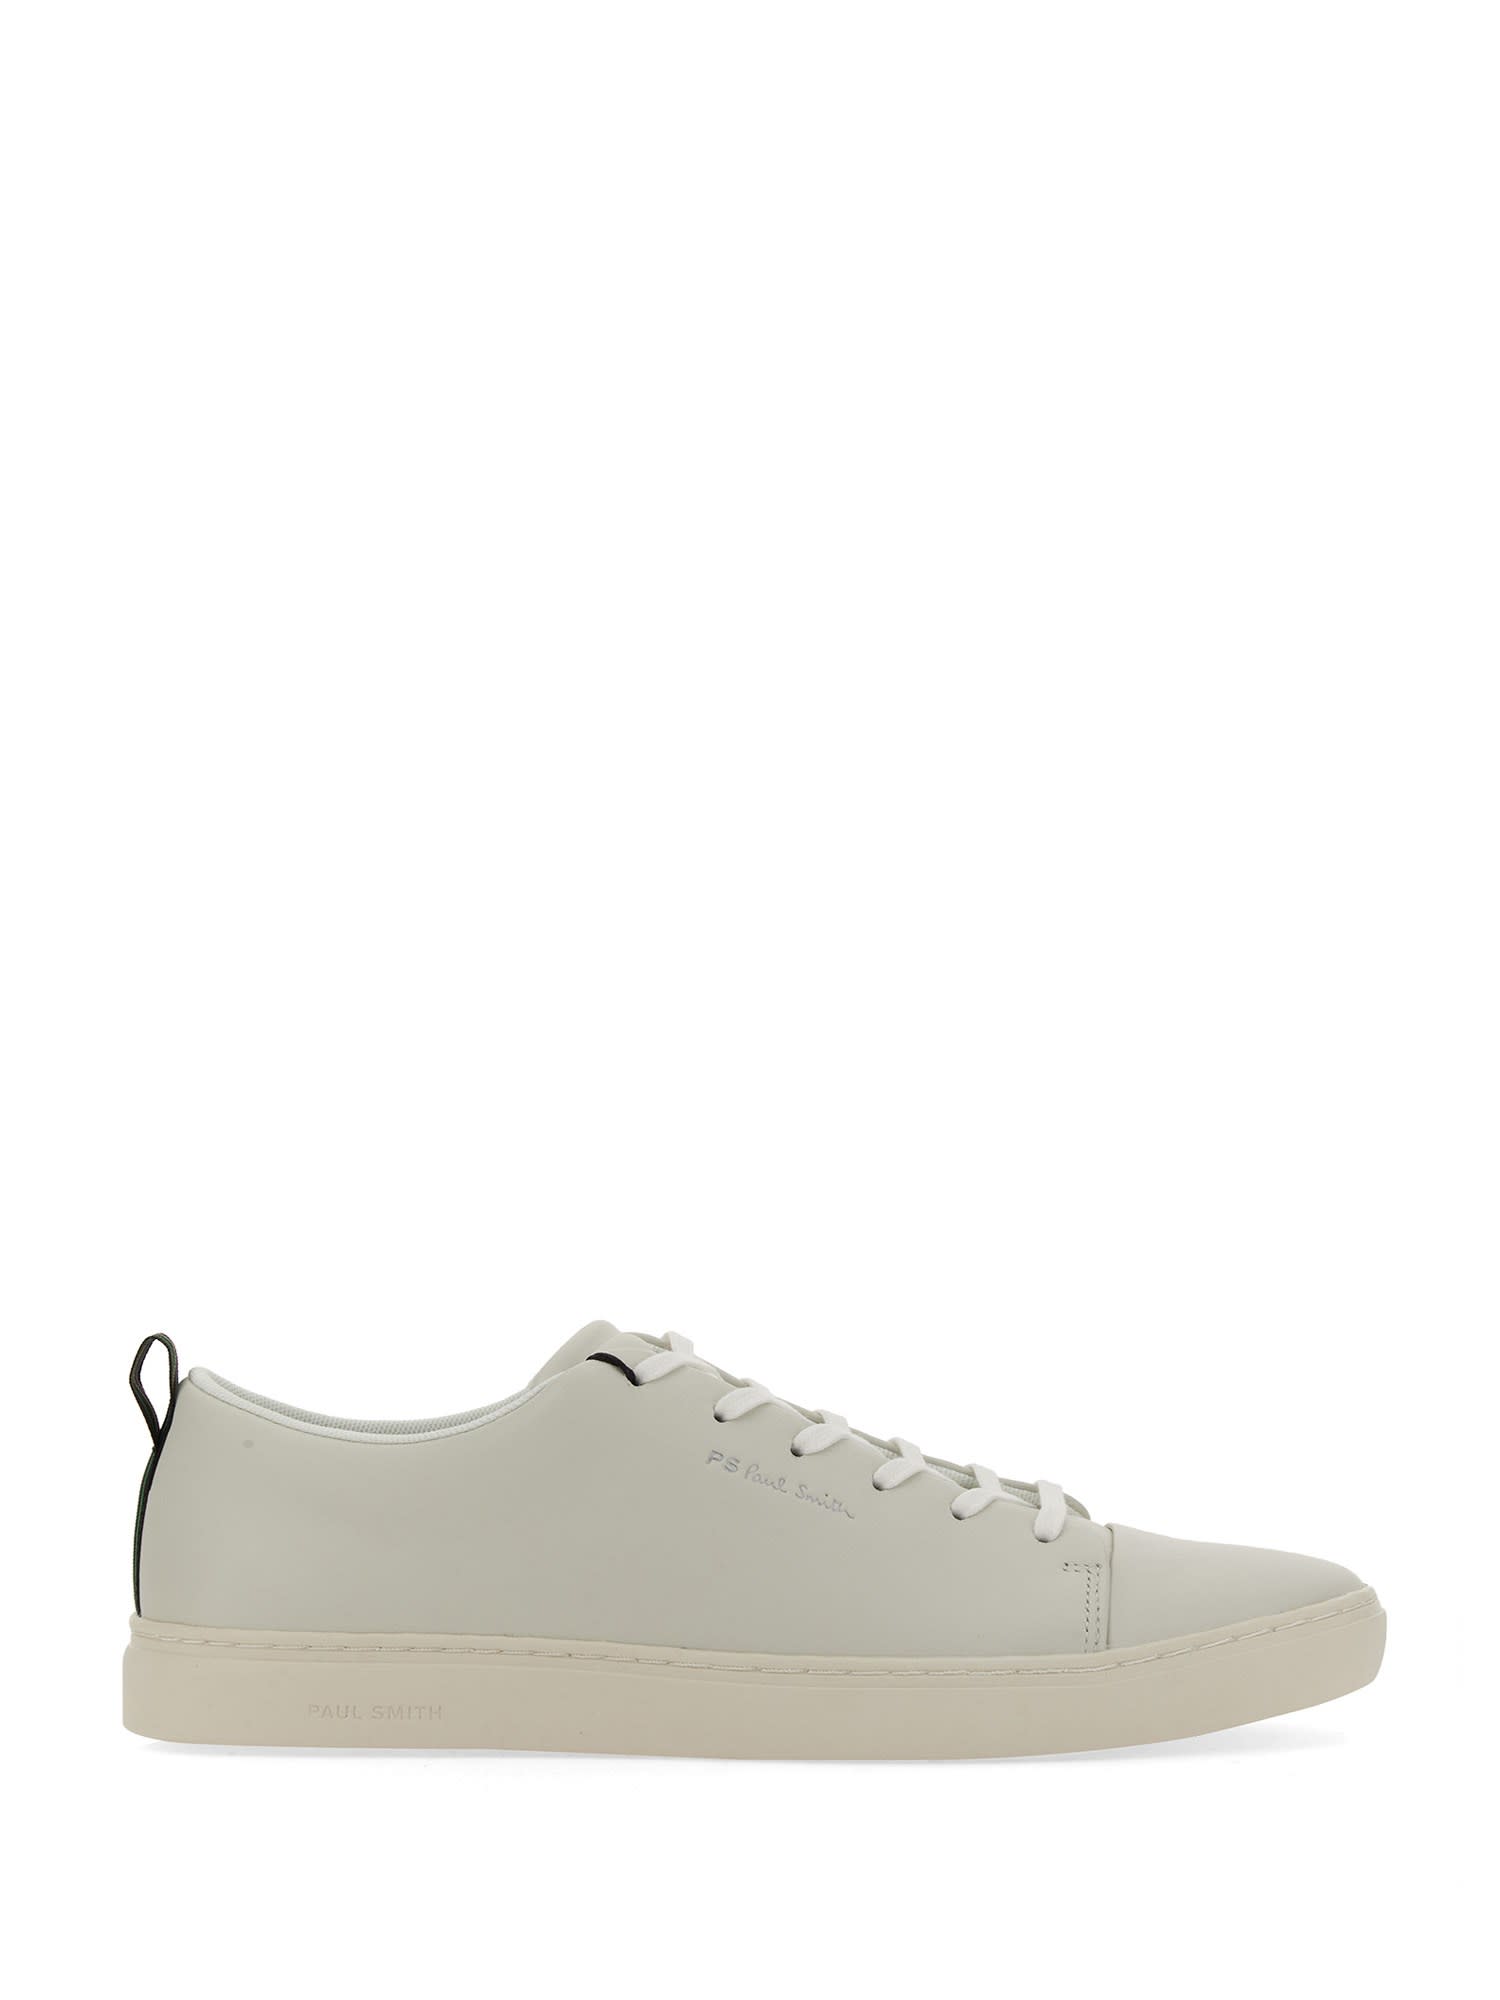 PS BY PAUL SMITH SNEAKER WITH LOGO